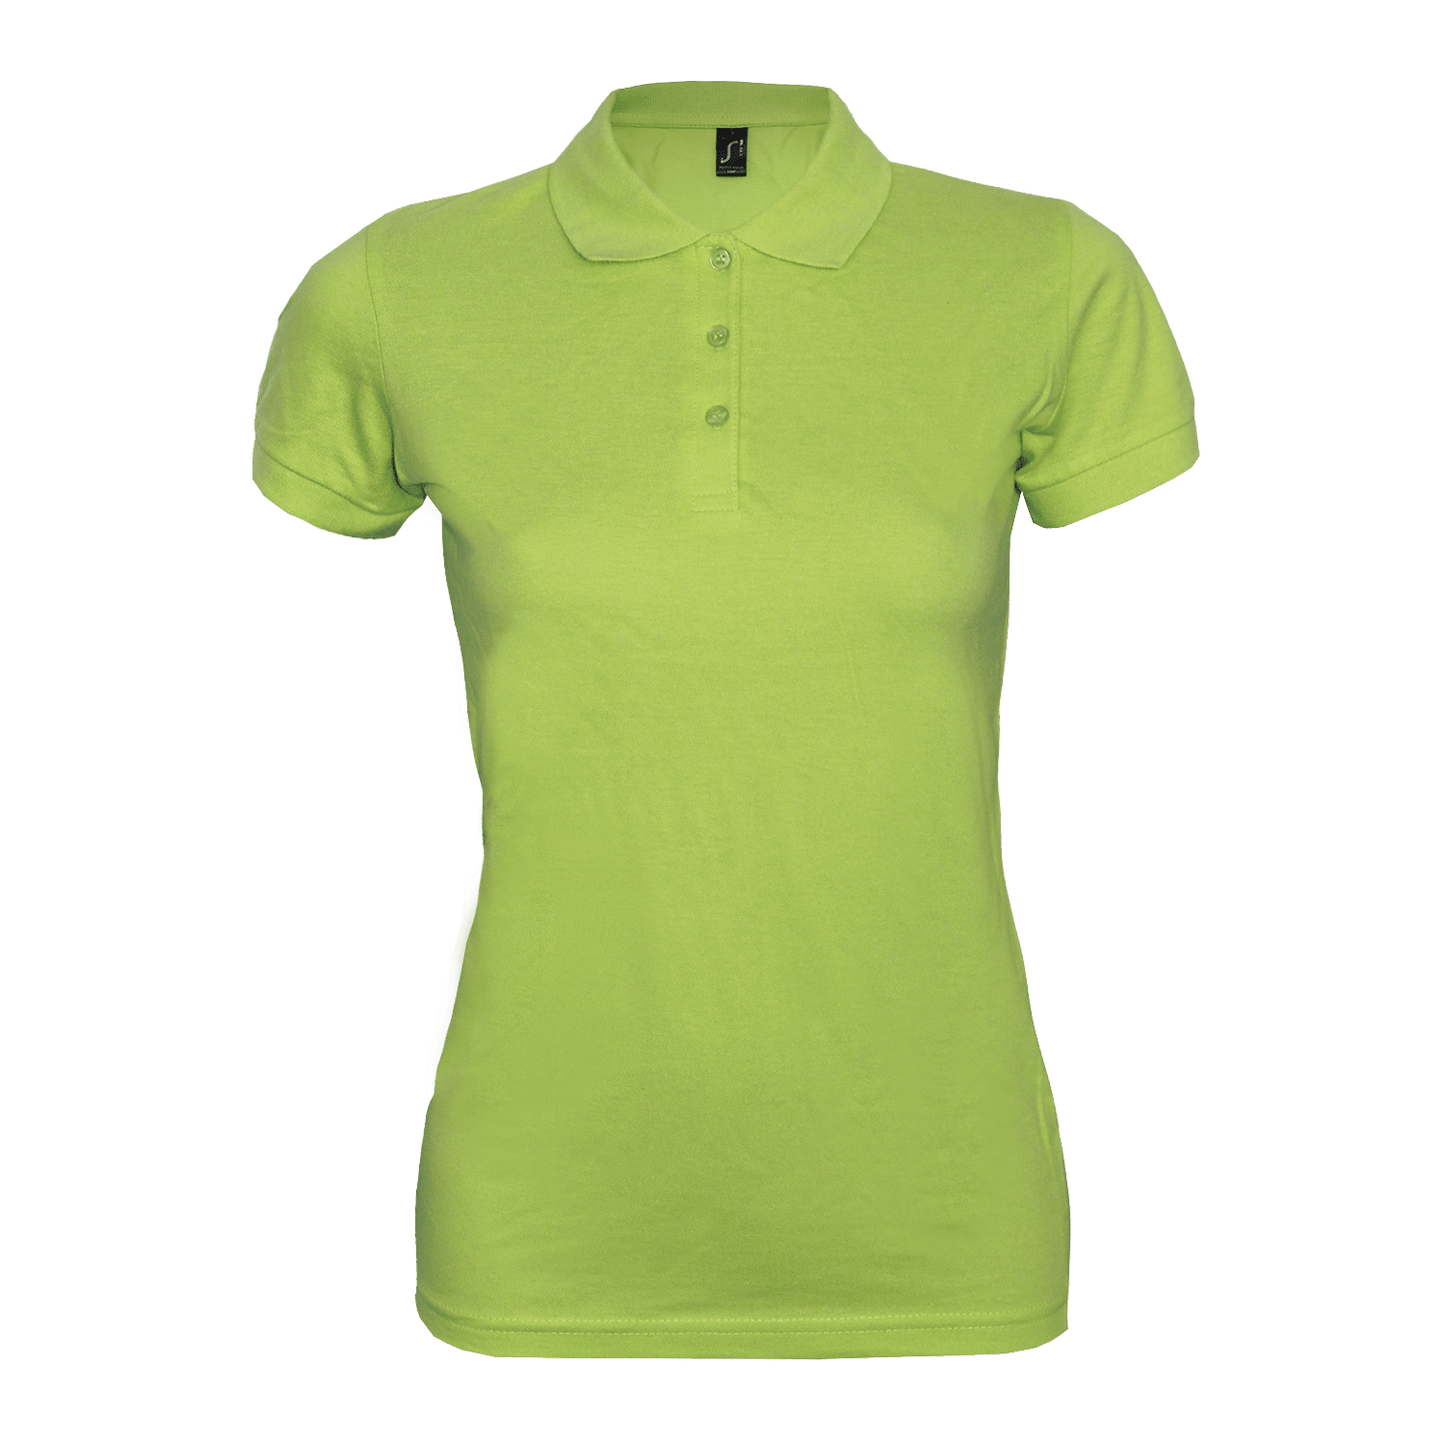 Sol's "Perfect" Girly Polo